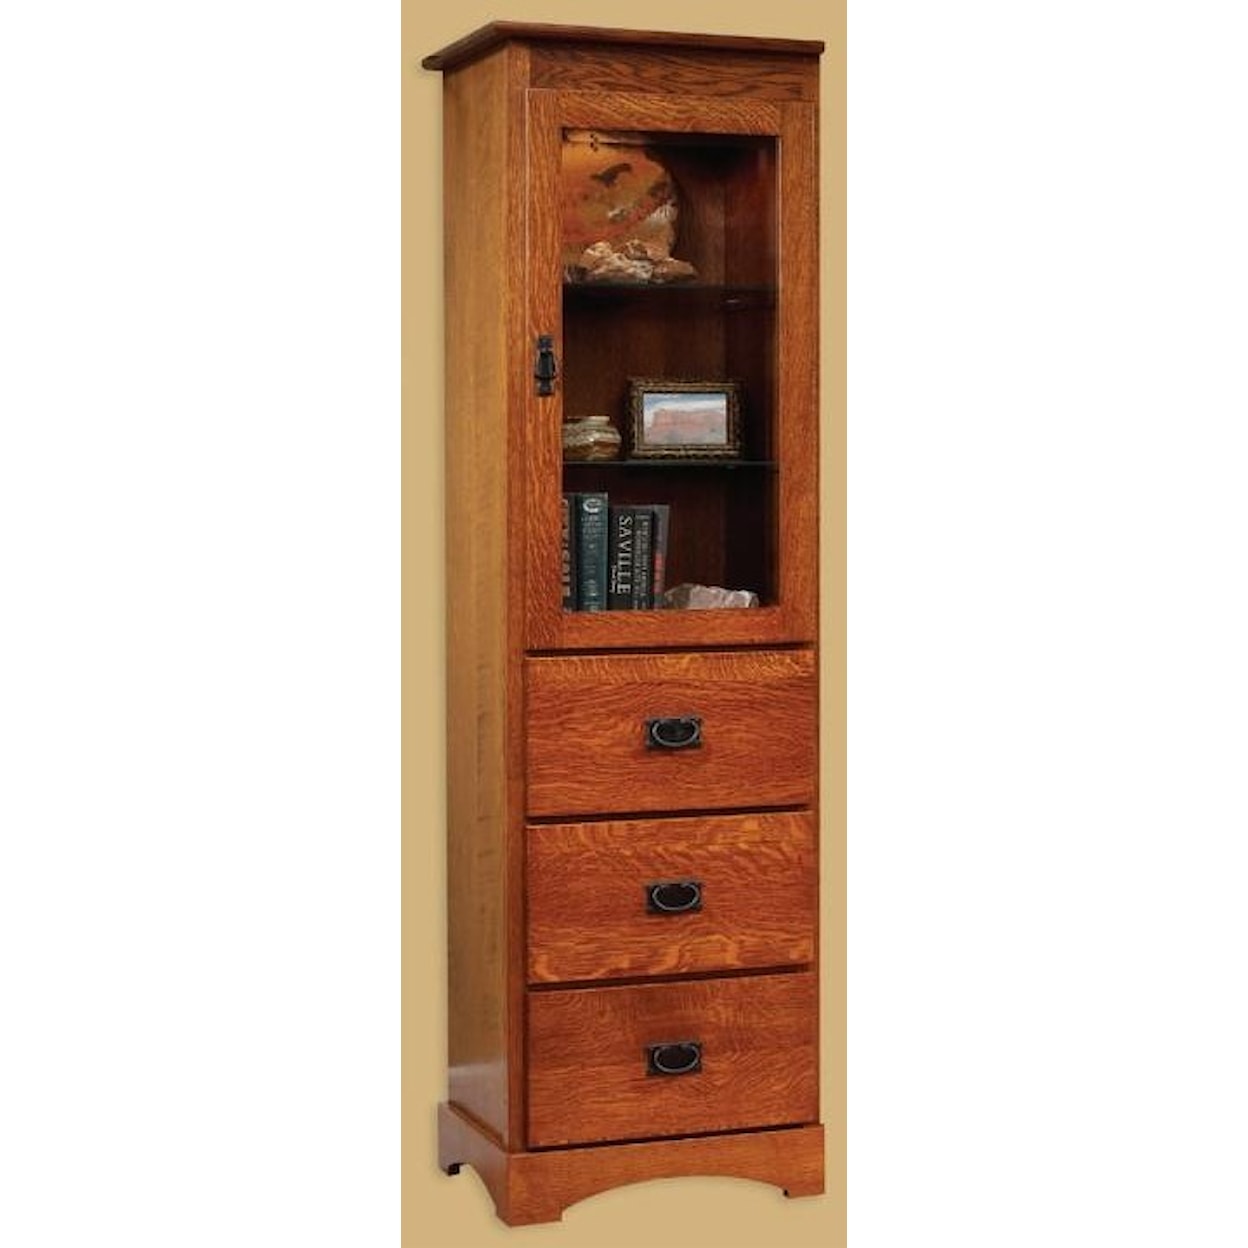 Millcraft Old English Mission Bookcase